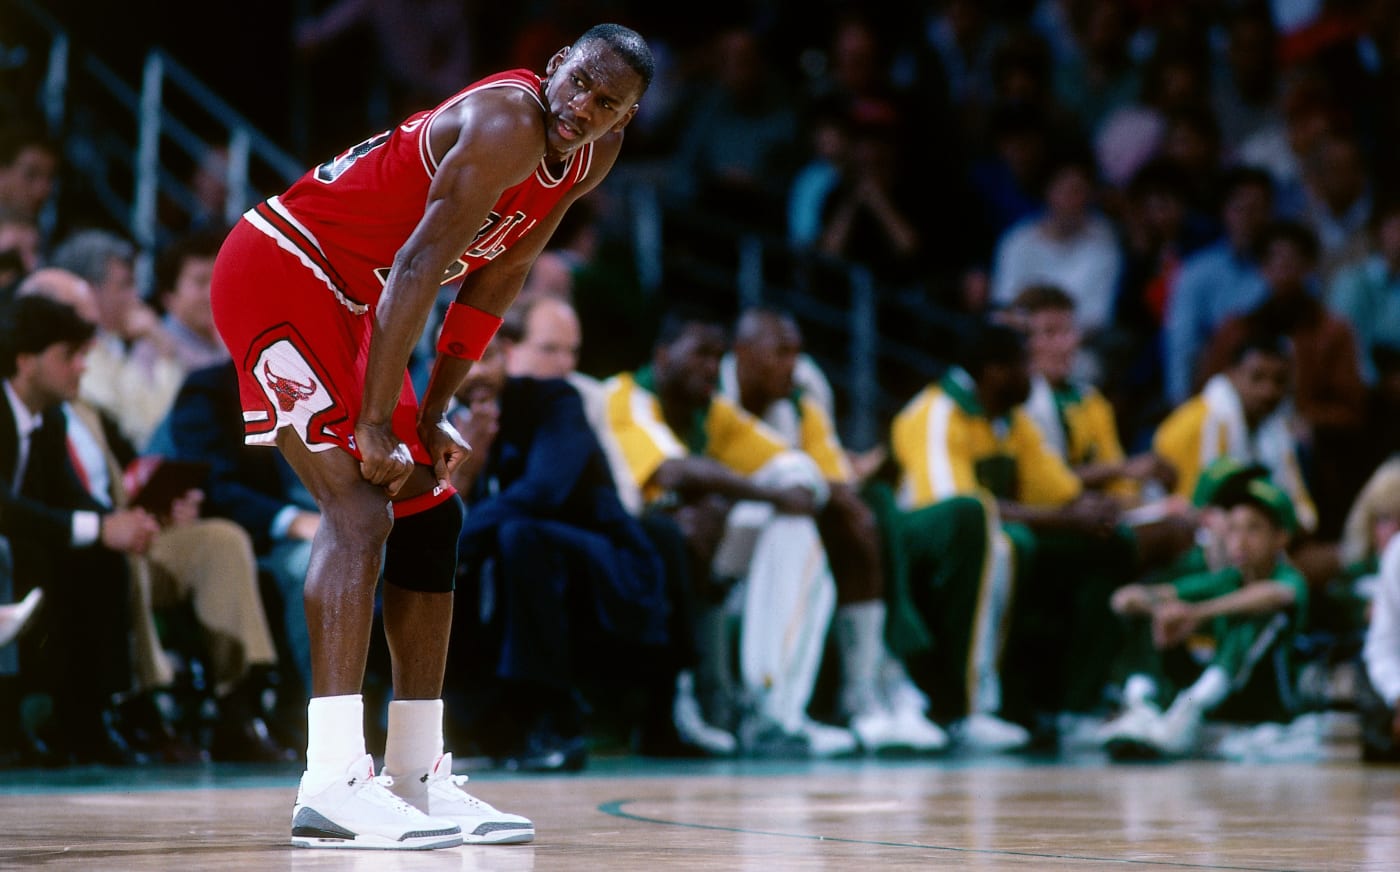 Michael Jordan with his hands on his knees in a Chicago Bulls uniform in 1988